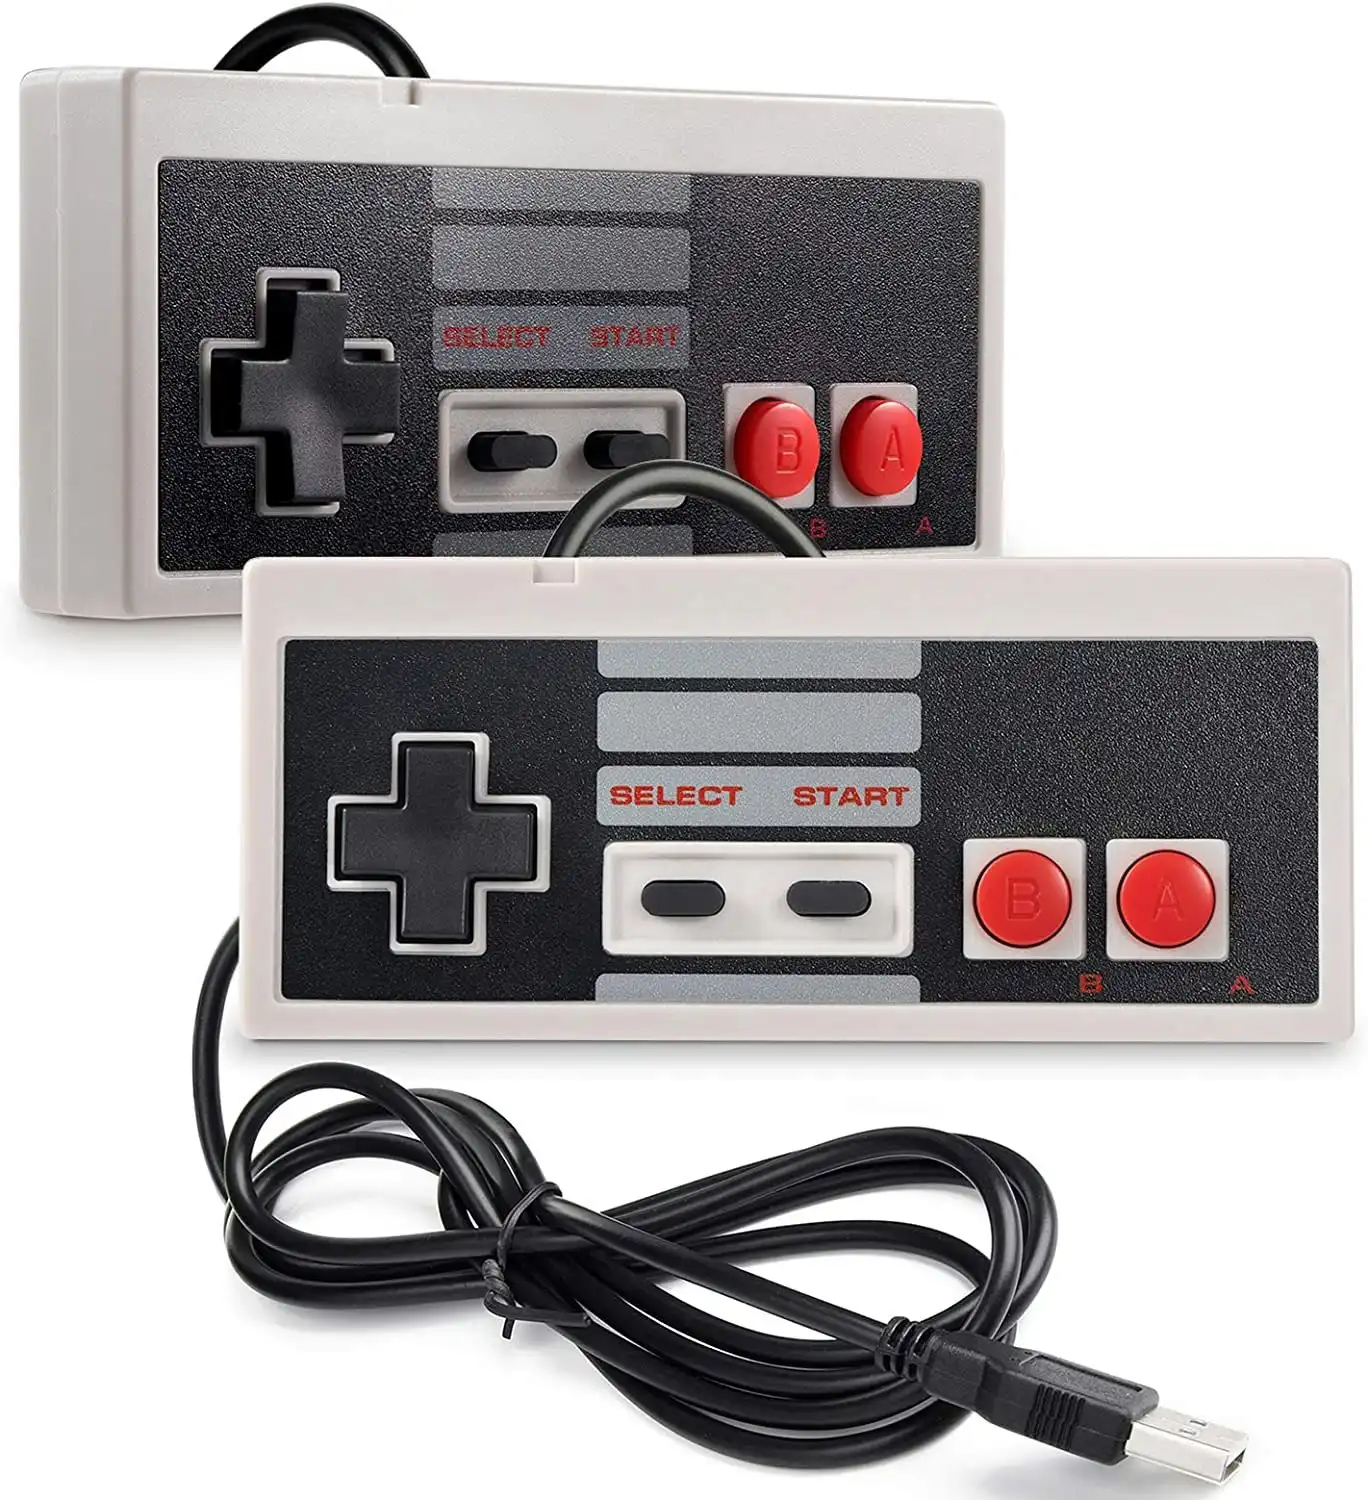 [2 Pack] USB Controller for NES Games / PC / Console / Retro Gamepad